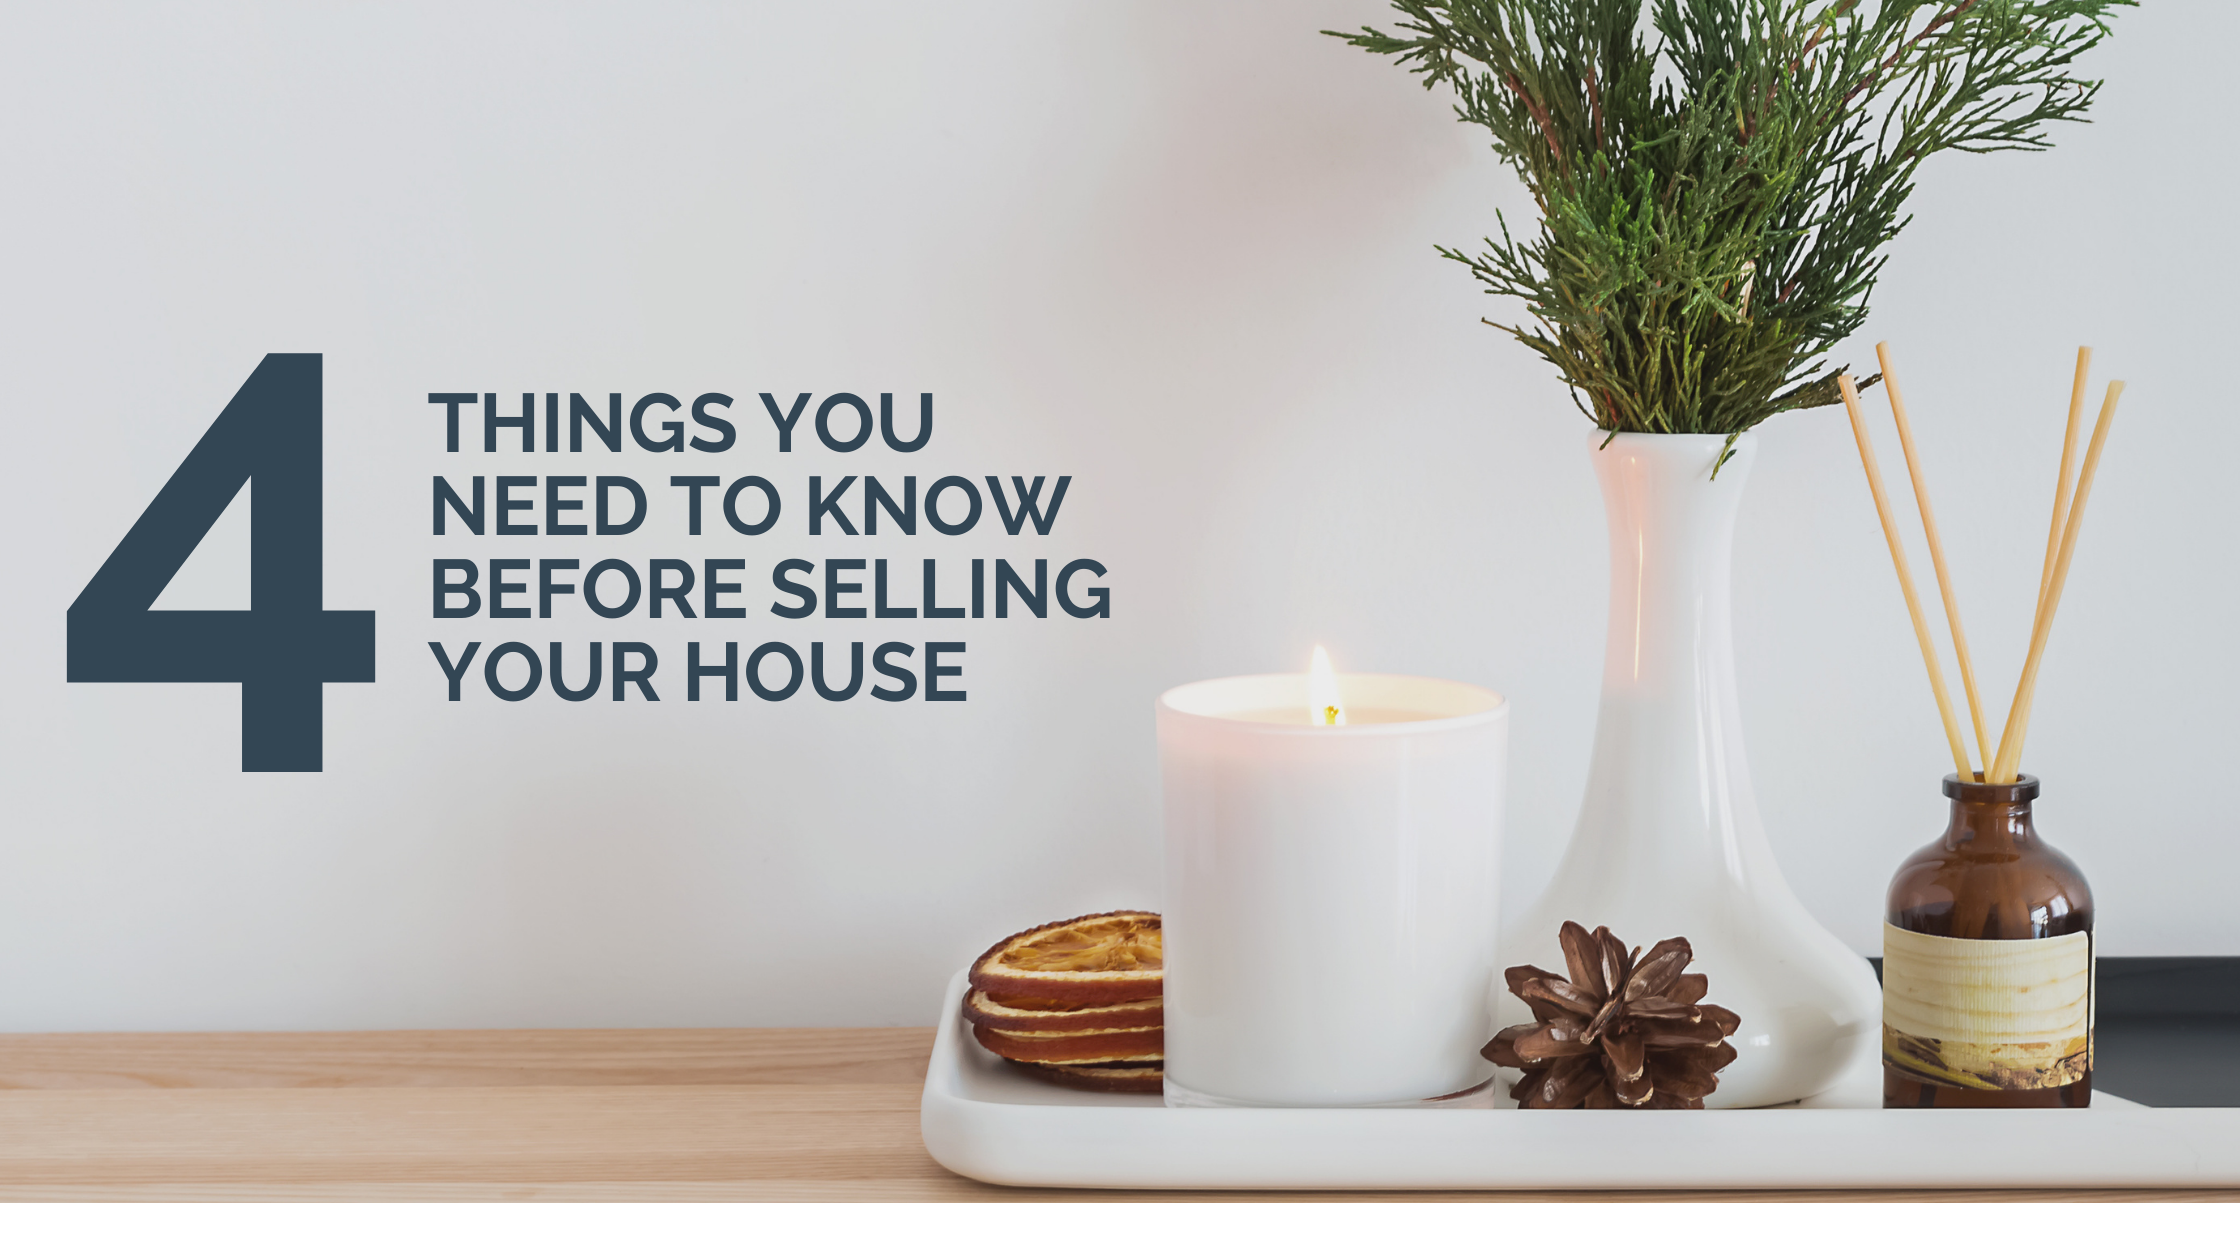 4 Things You Need to Know Before Selling Your House